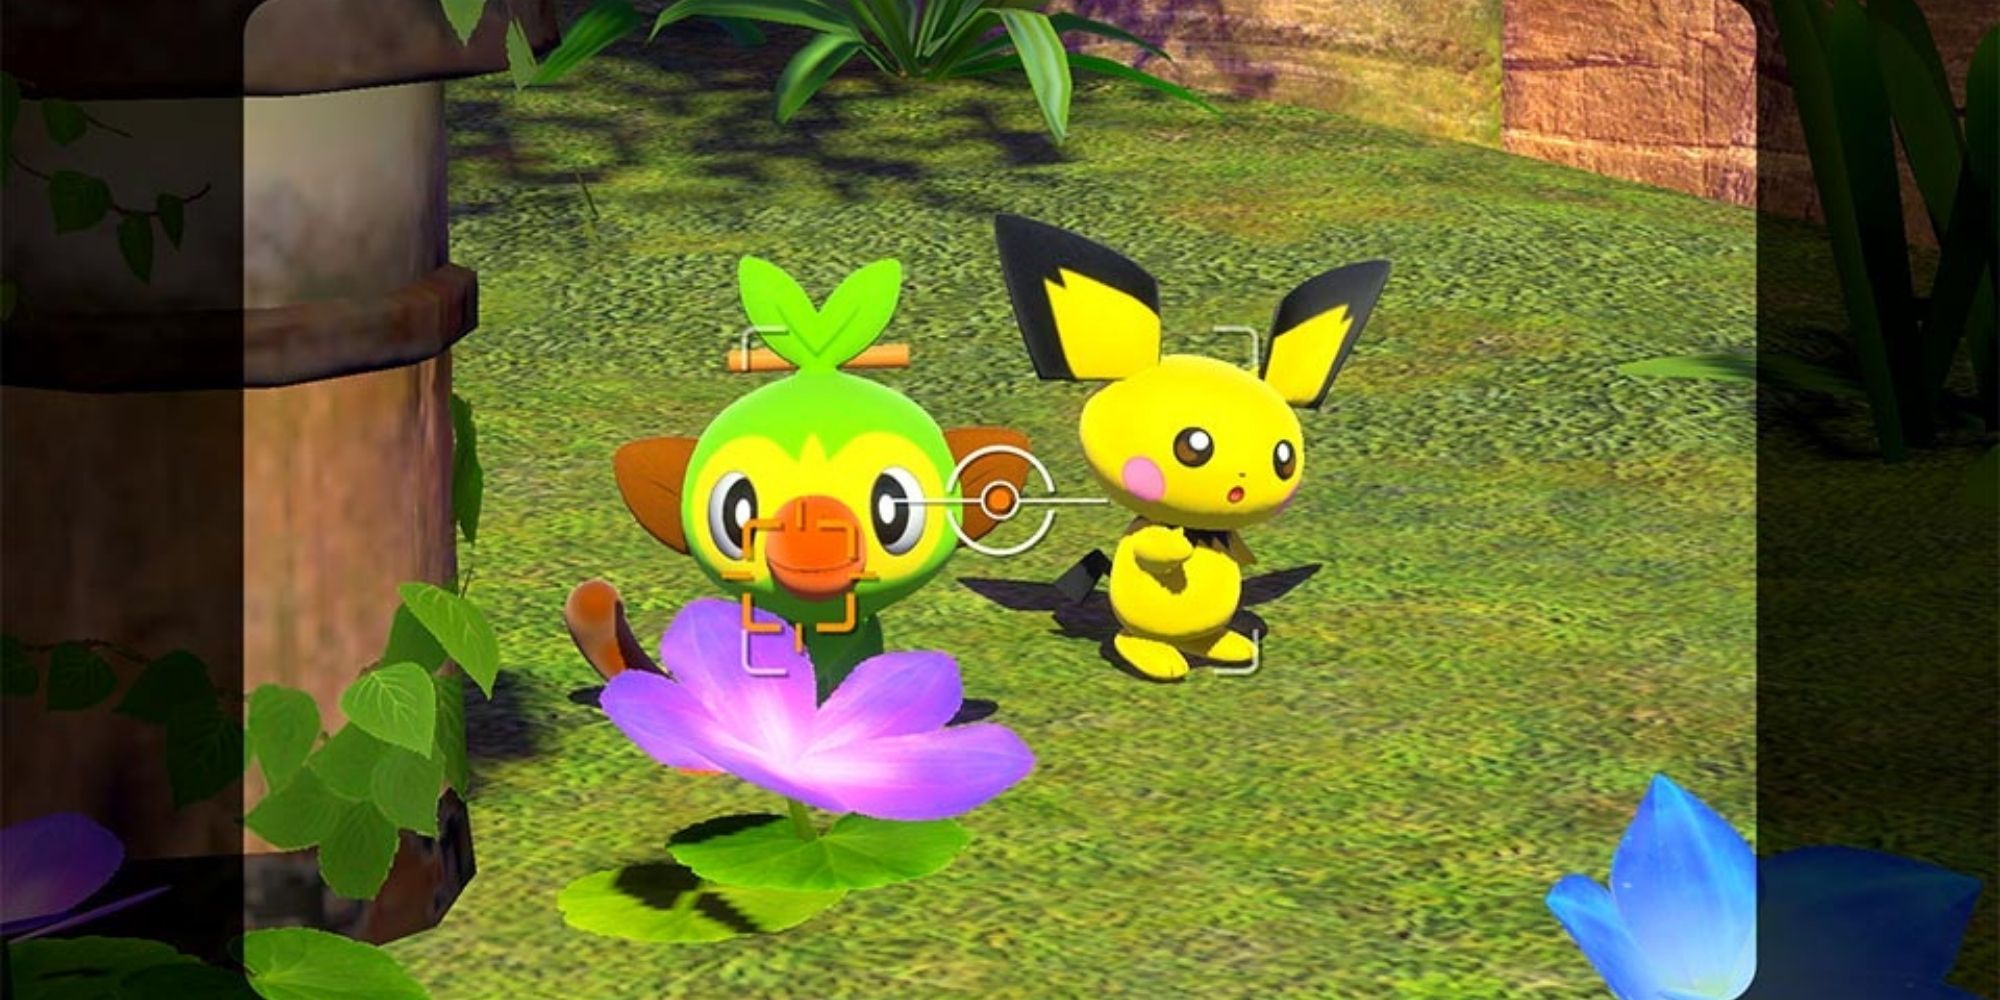 Grookey and Pichu from the video game New Pokemon Snap.